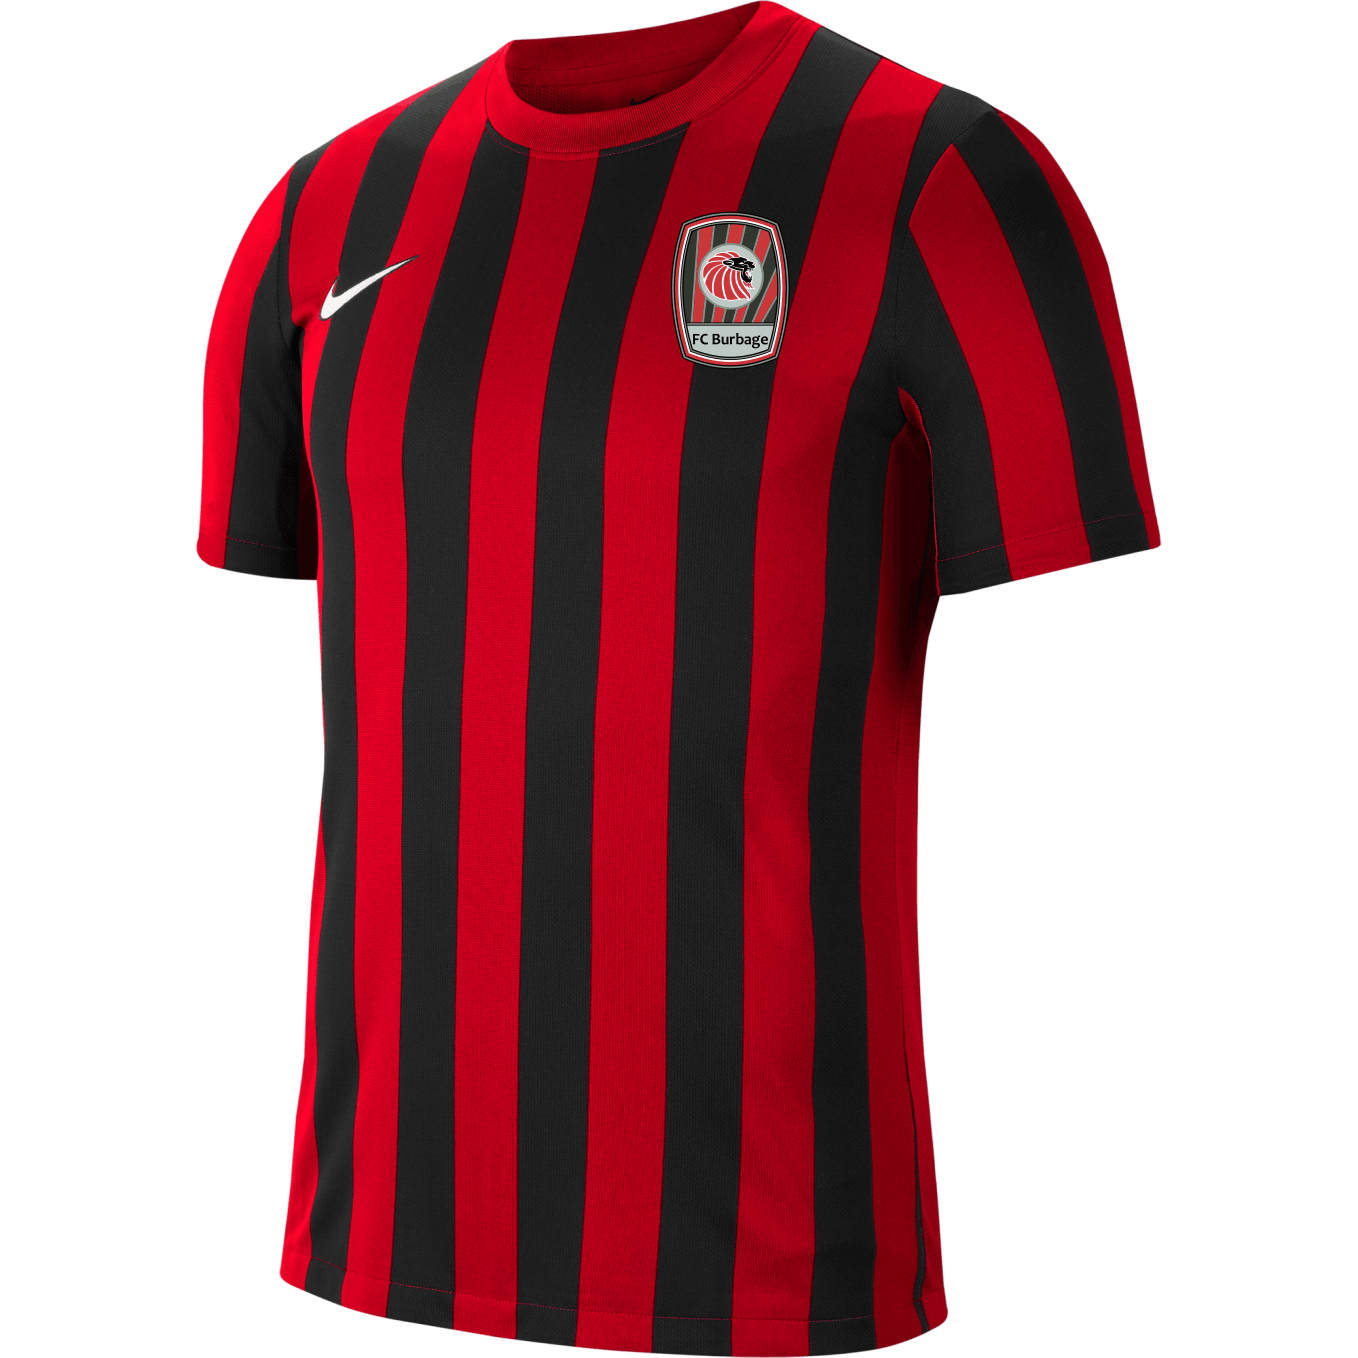 Burbage - Striped Division IV Home Jersey